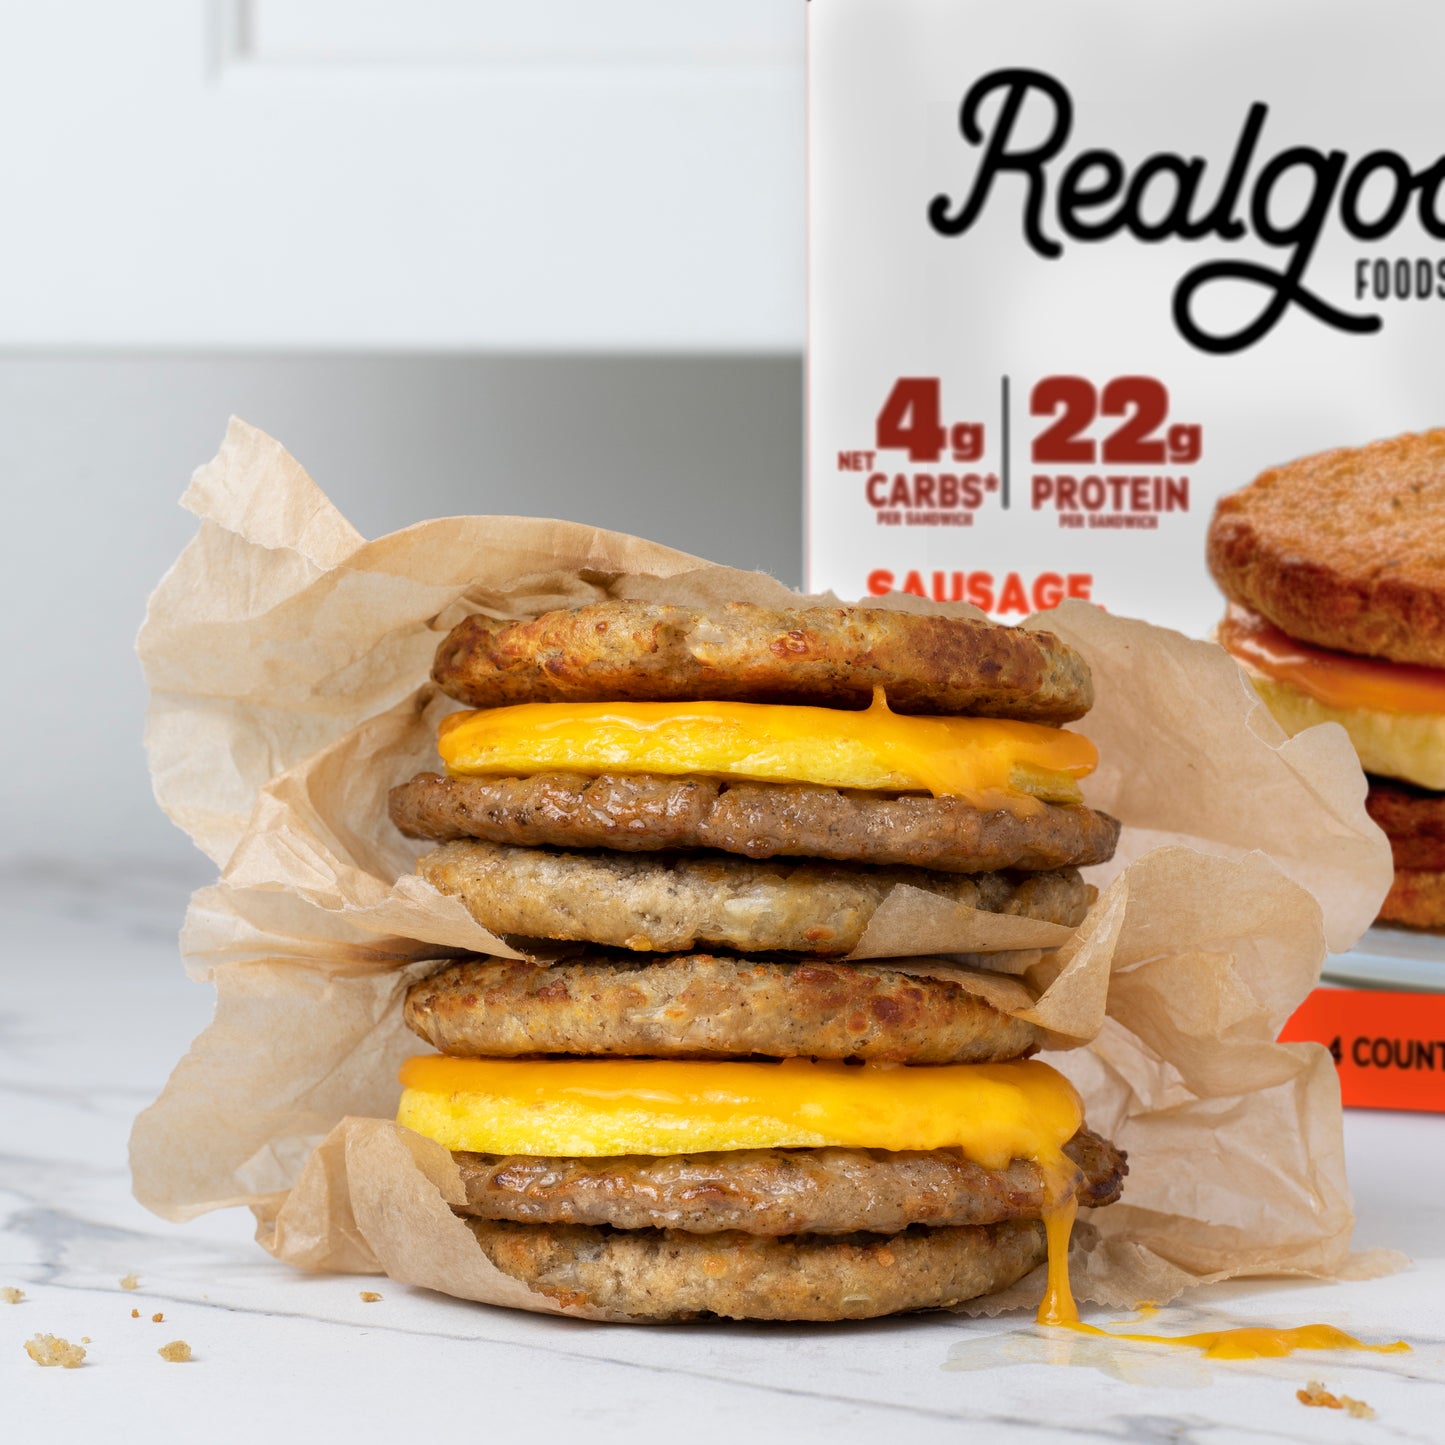 Real Good Foods Breakfast Sandwich Sausage, Egg & Cheese (4 count) Prepared